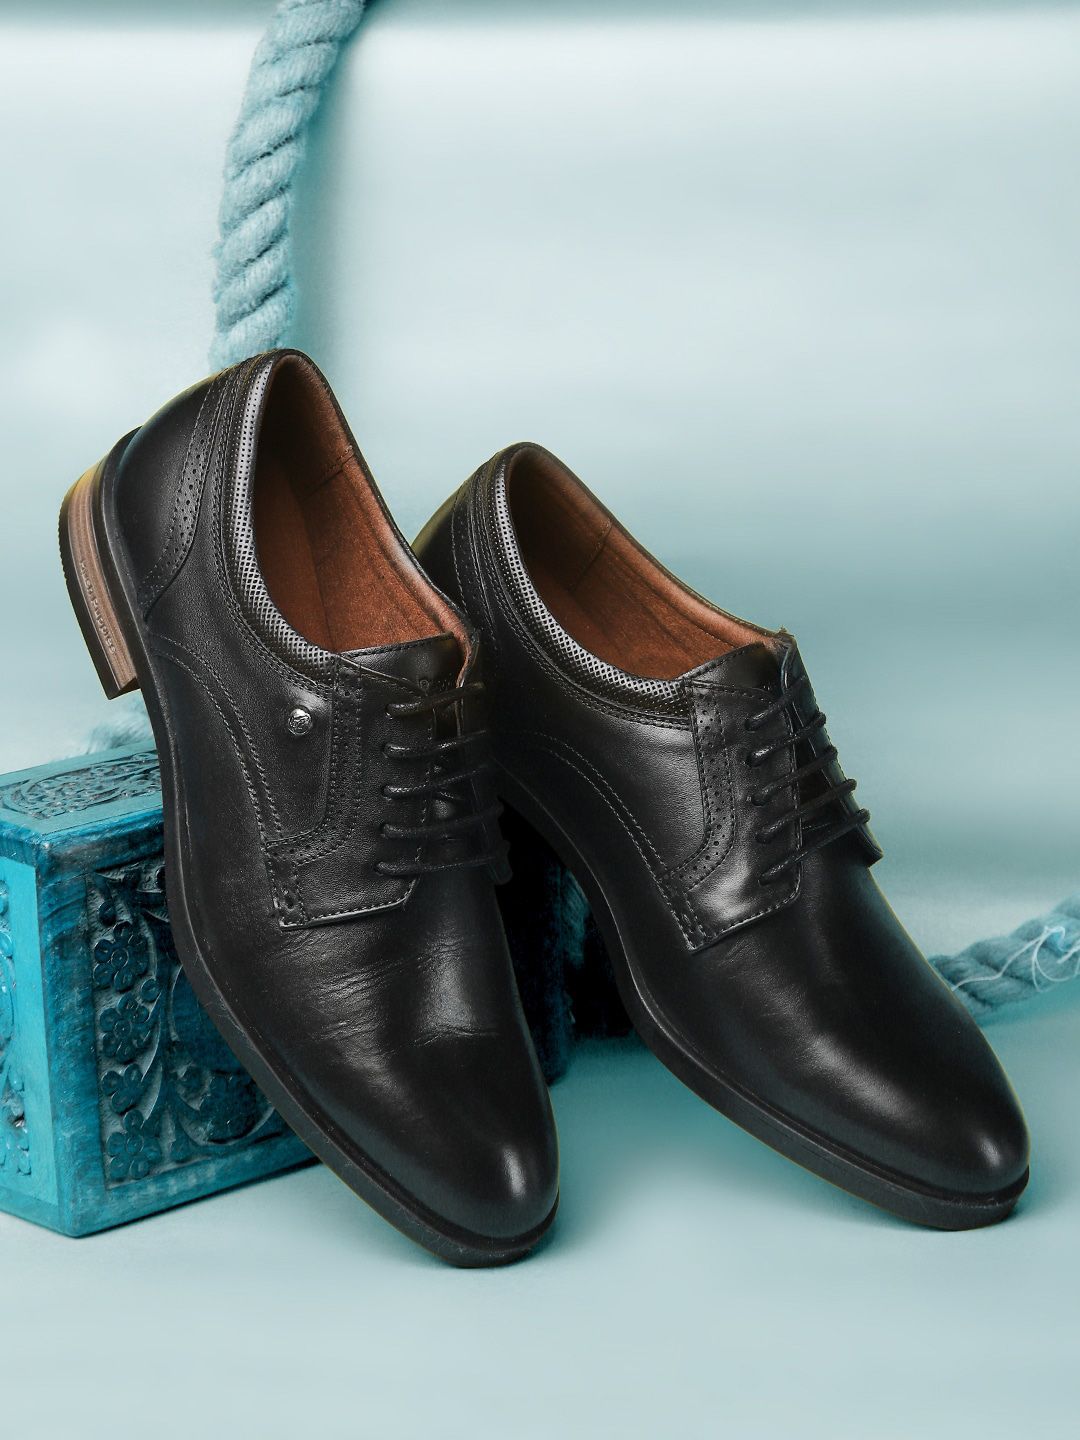 Hush Puppies Men Lace-up Leather Formal Debys Shoes